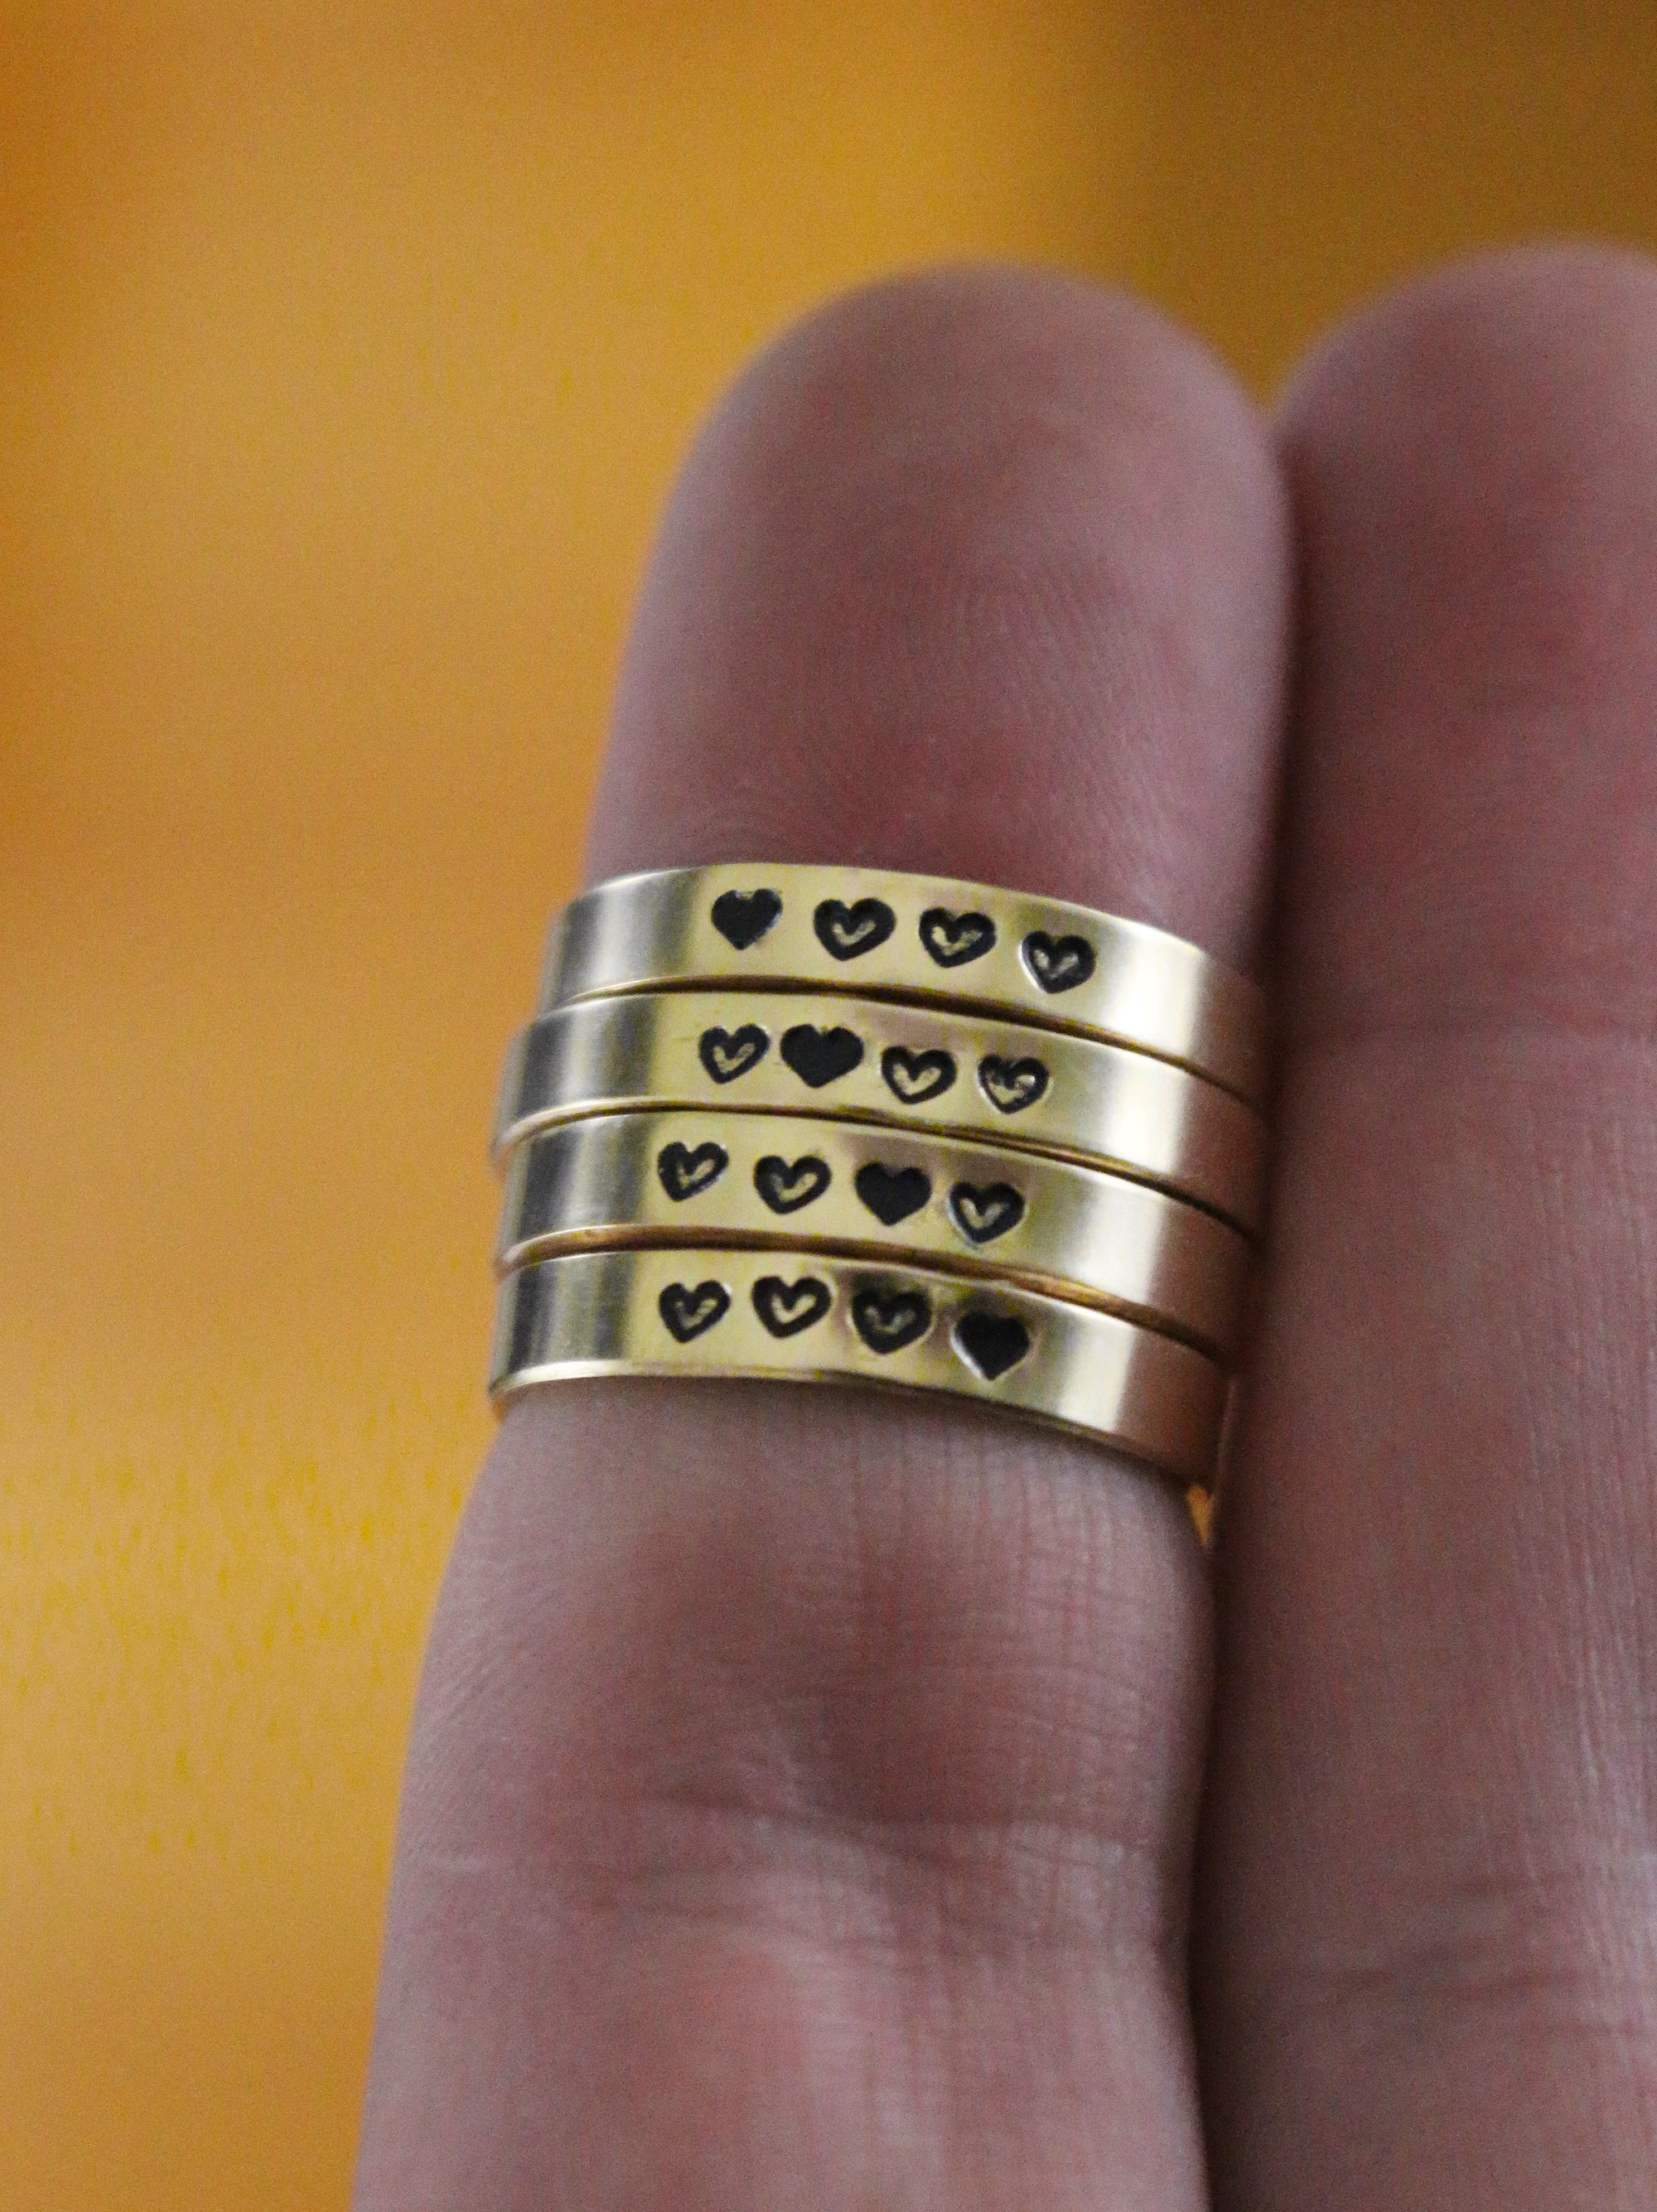 Best Friend Heart Rings for 2, 3, 4, 5, 6, 7, or 8